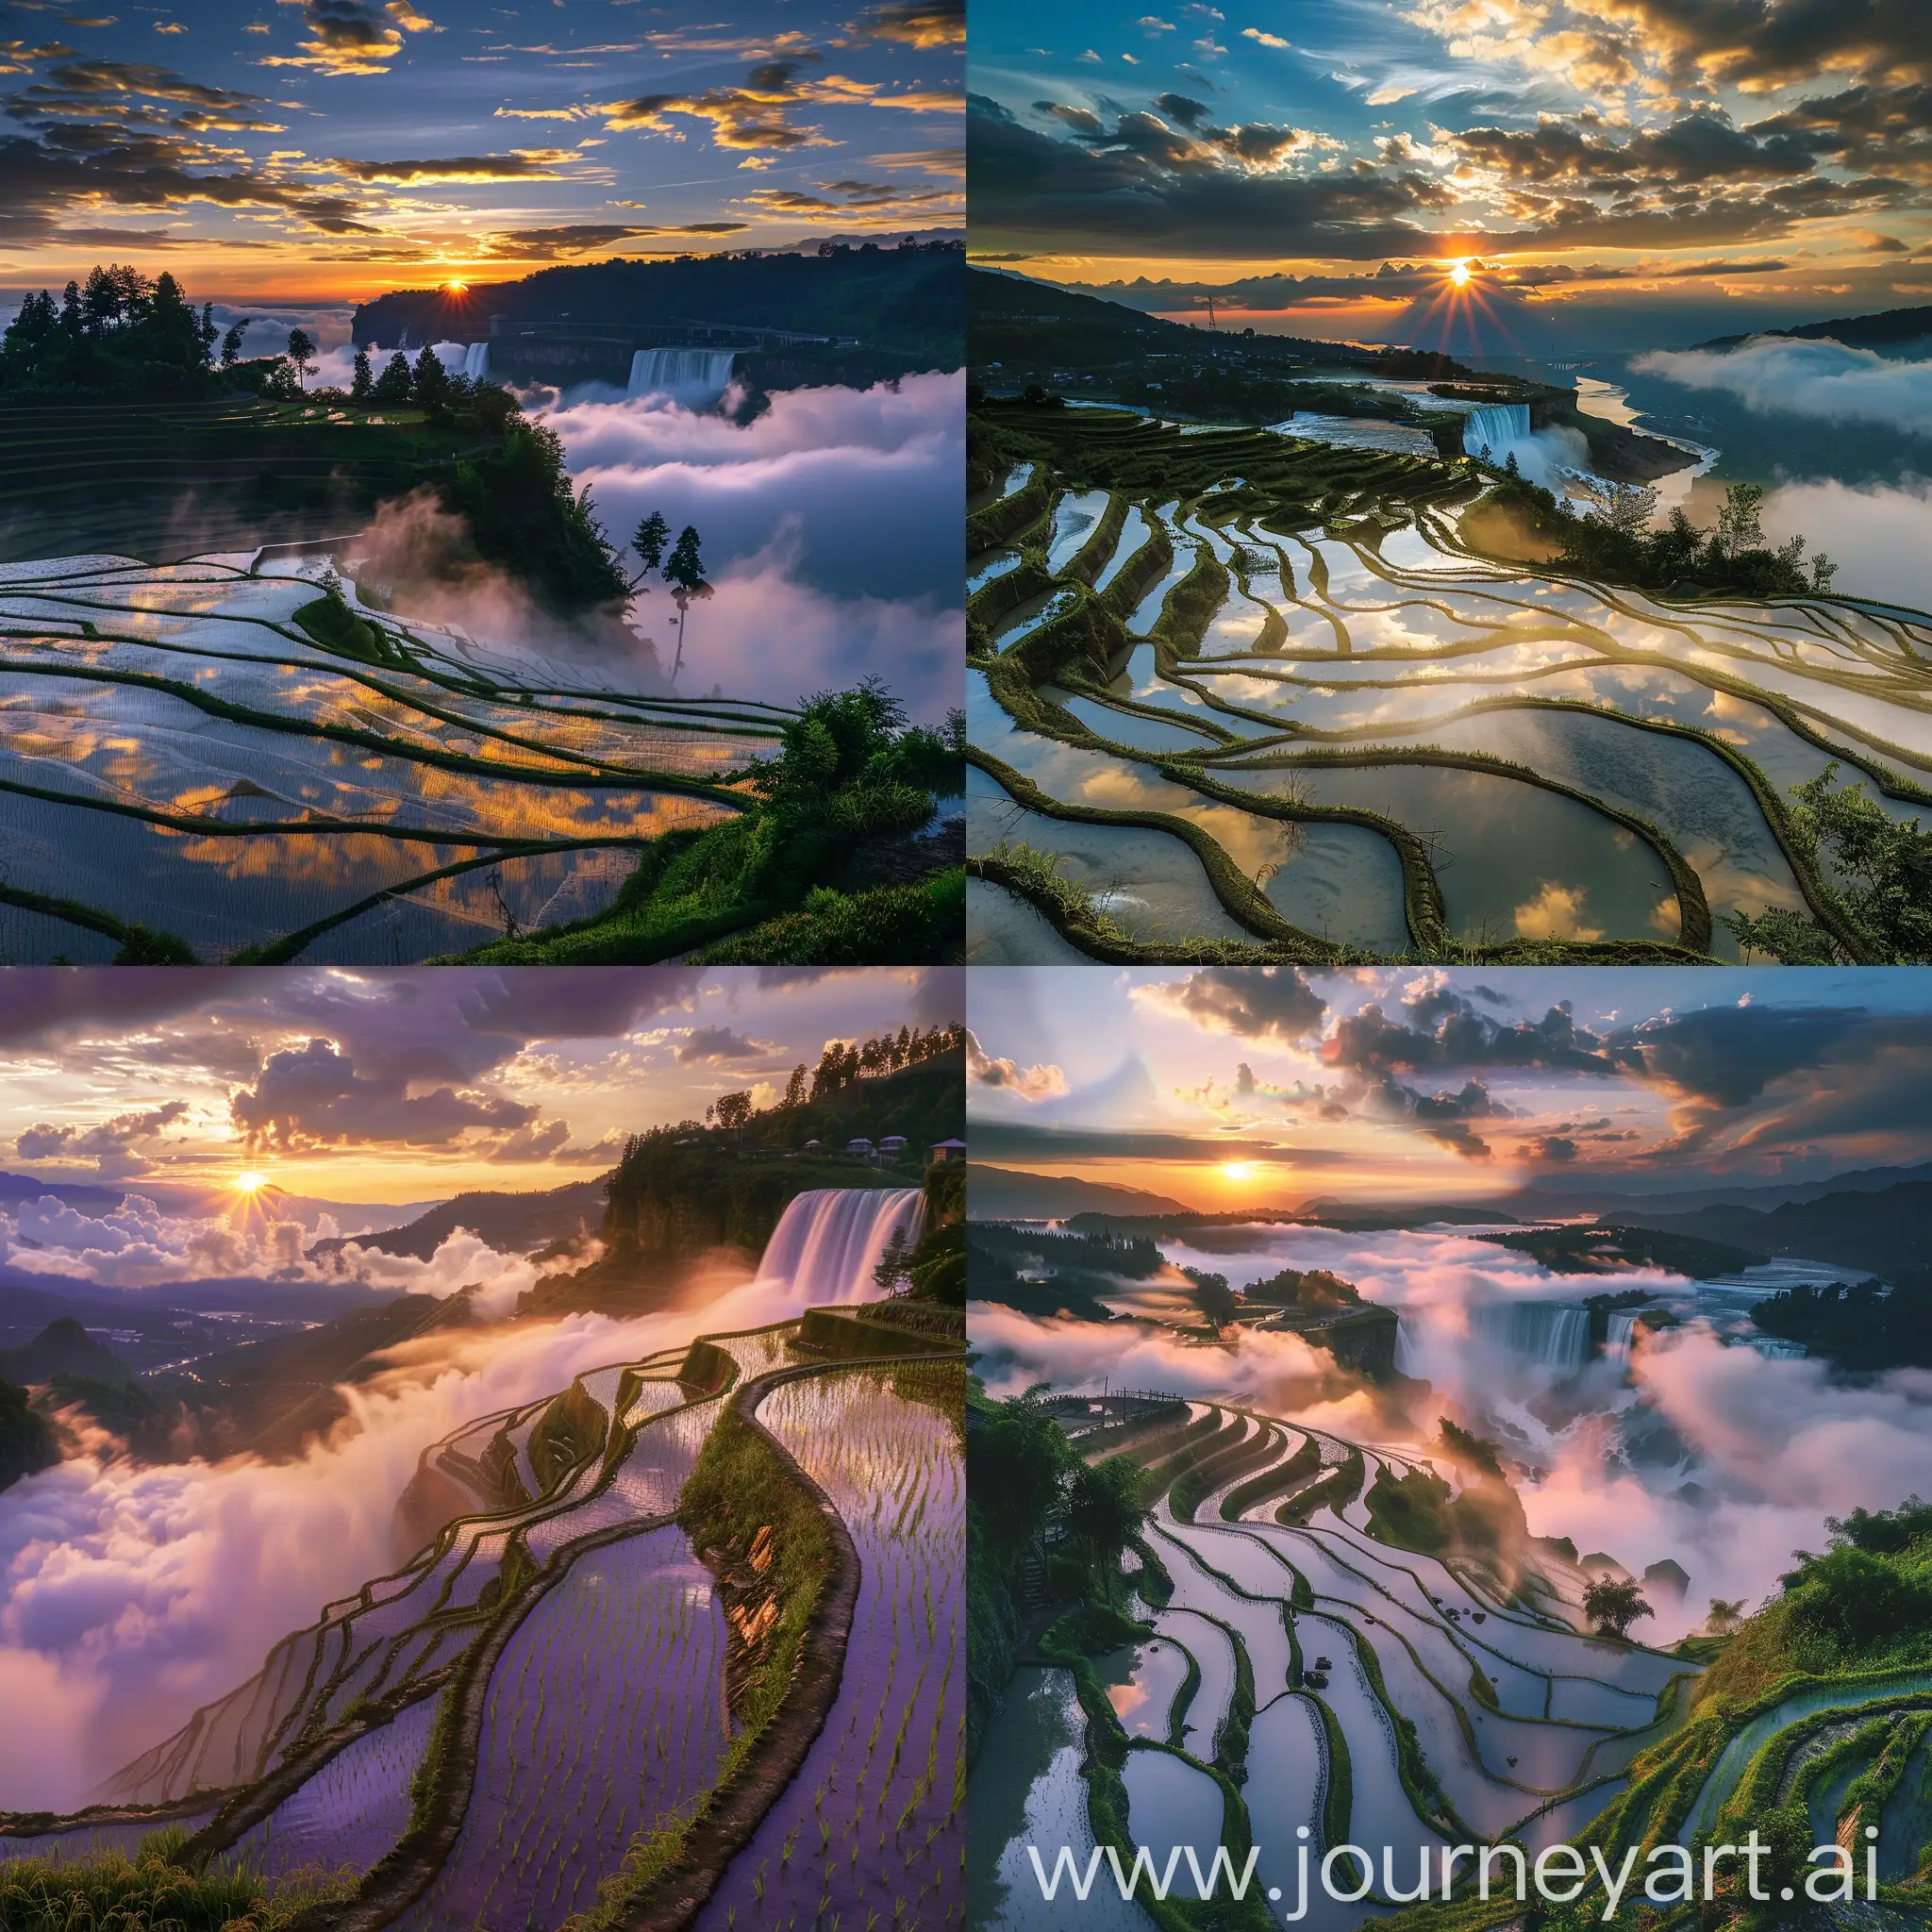 rice fields in clouds at sunset in yushan, niagara falls, usa, in the style of grid formations, traditional landscapes